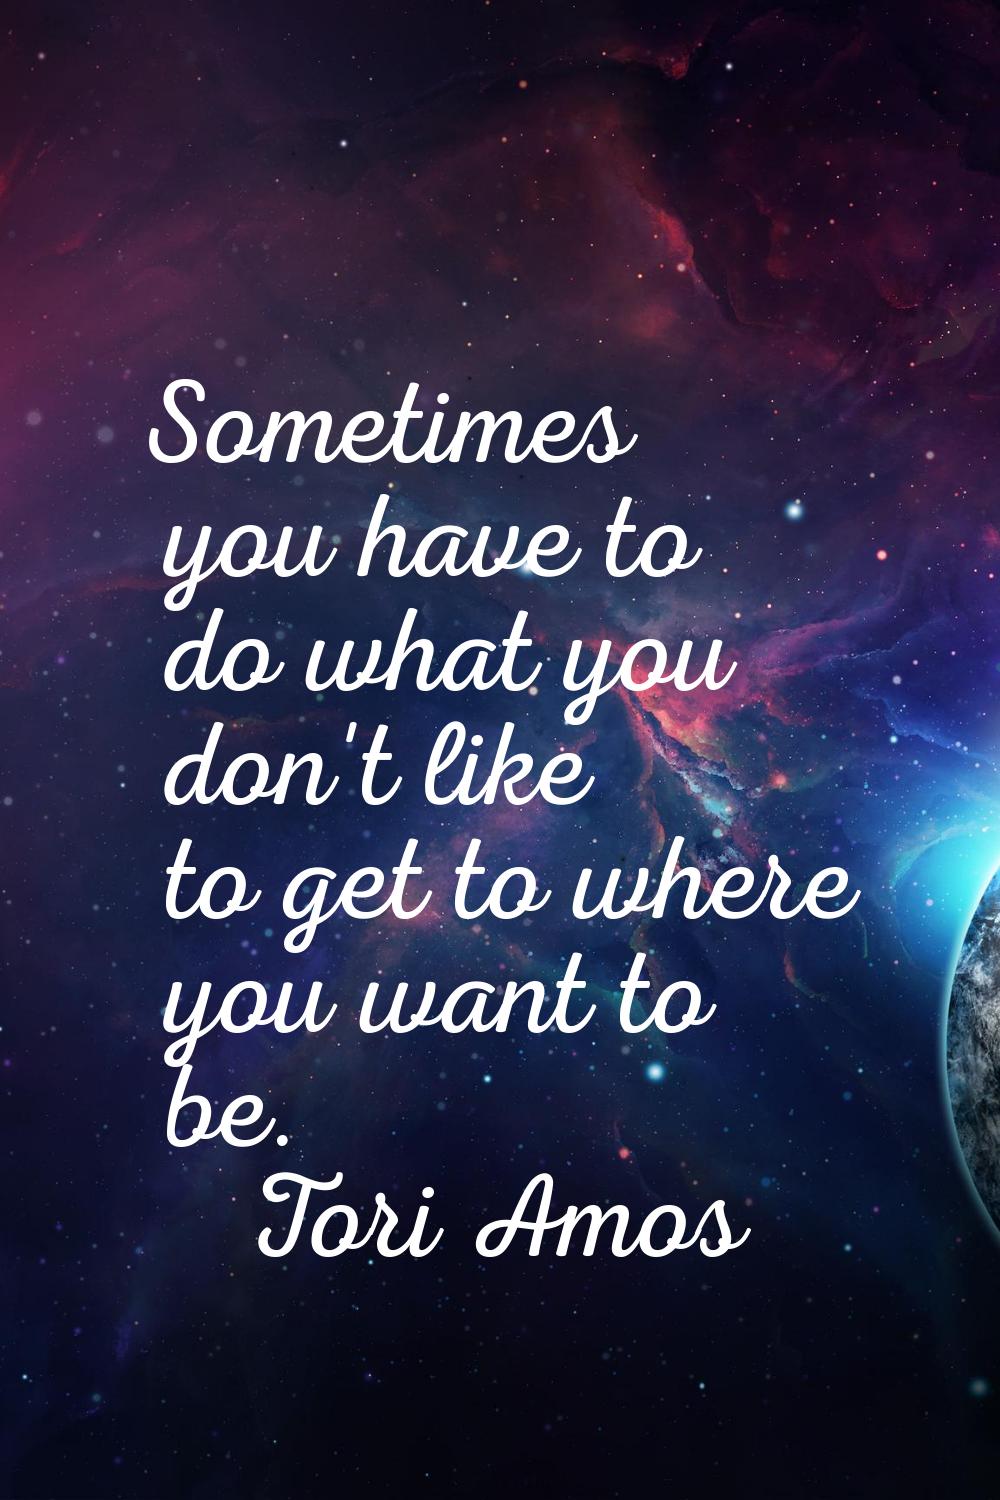 Sometimes you have to do what you don't like to get to where you want to be.